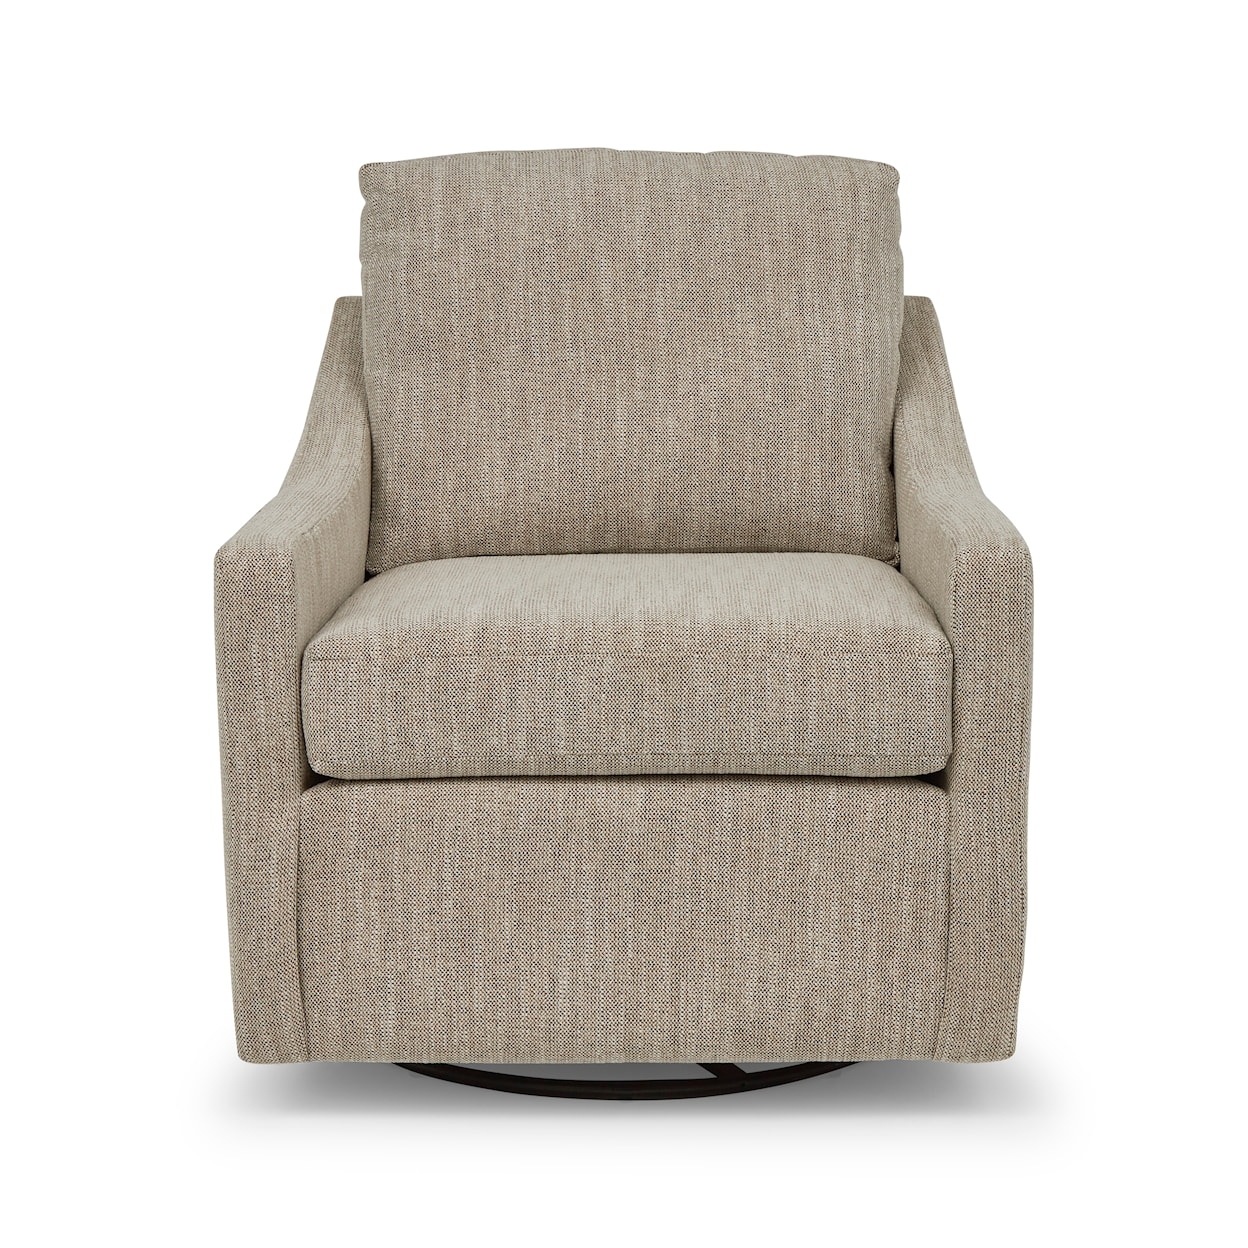 Best Home Furnishings Hallond Swivel Glider Chair